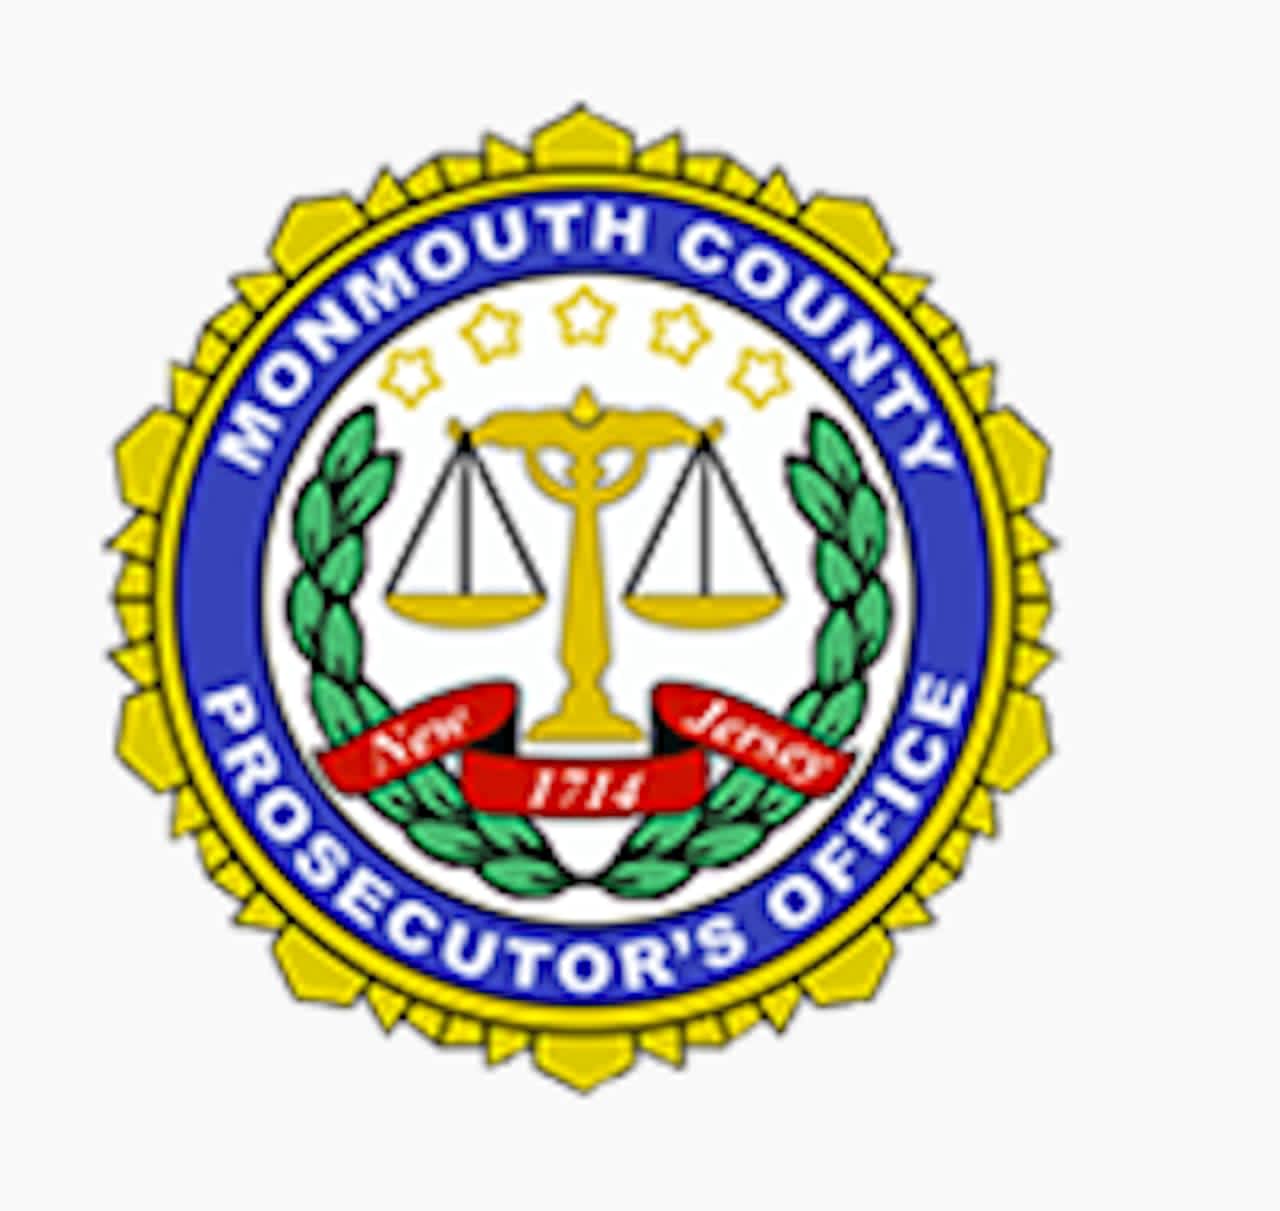 The Monmouth County Prosecutor's Office announced the arrest of a Middletown man for setting fire to his family's home.